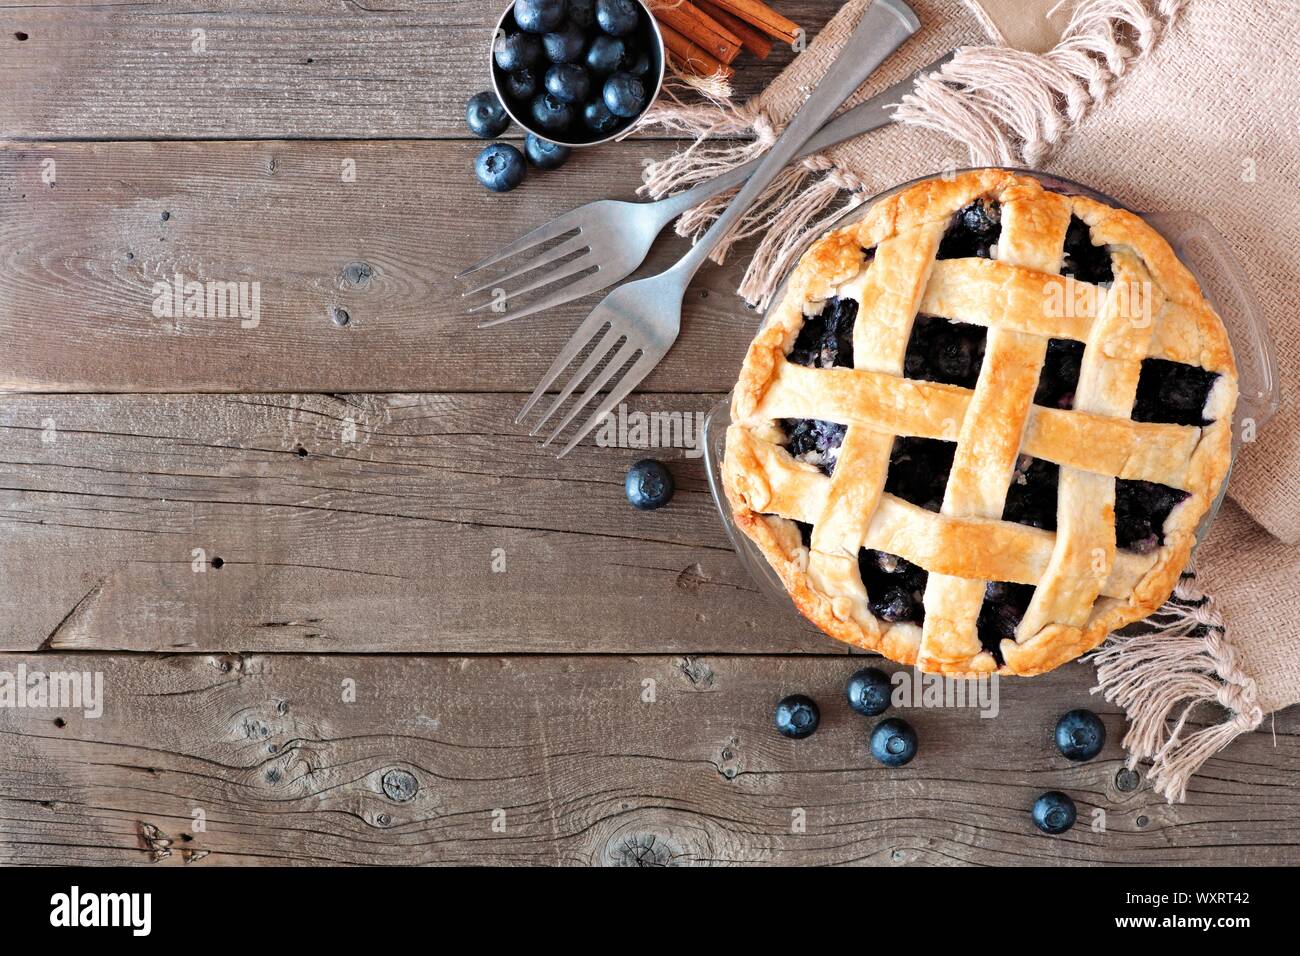 Rustic homemade blueberry pie with lattice pastry. Top view scene. Corner border with copy space over a rustic wood background. Stock Photo